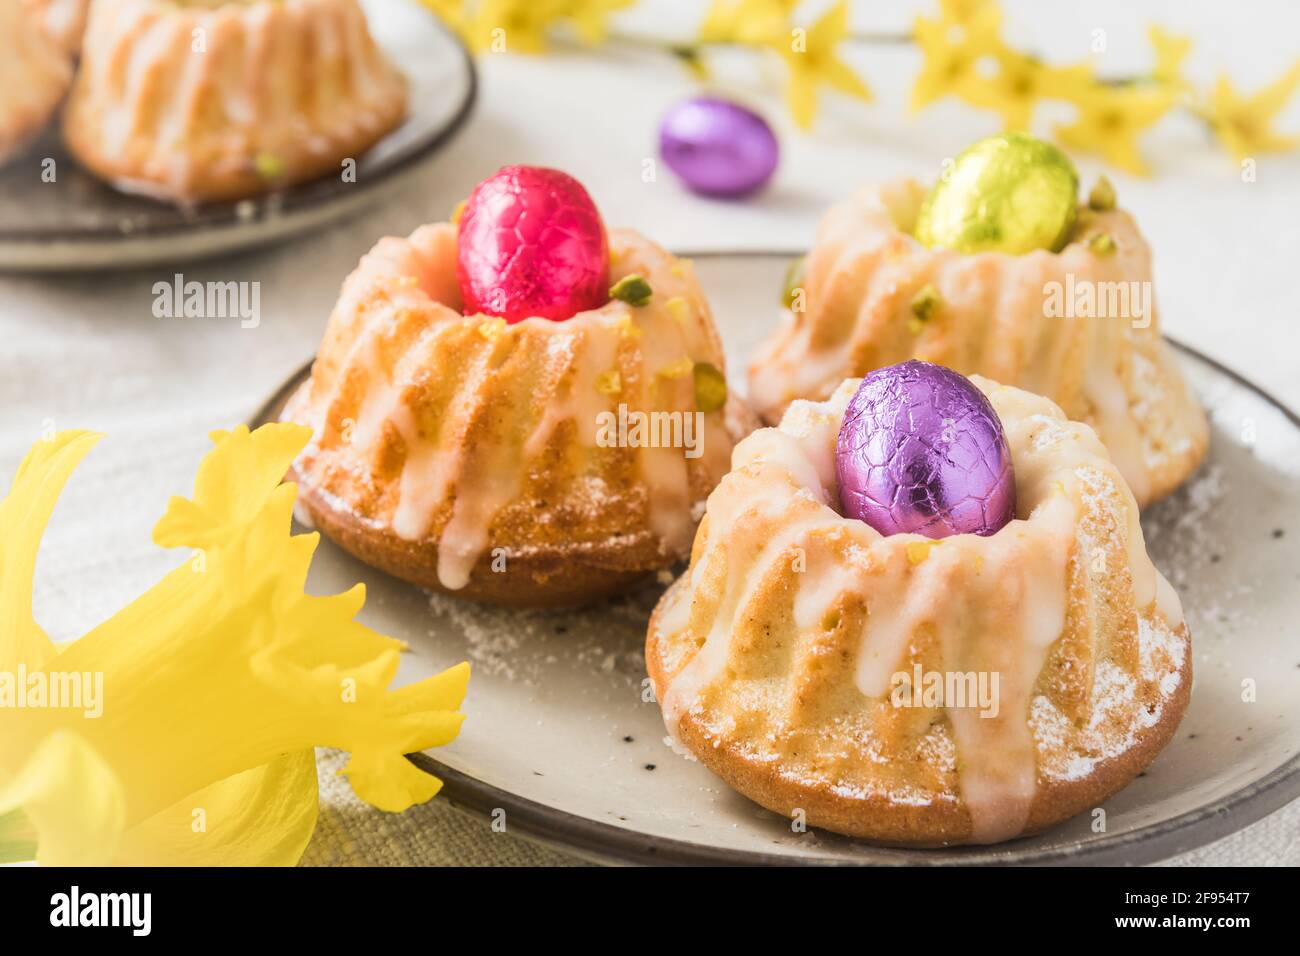 https://c8.alamy.com/comp/2F954T7/homemade-delicious-mini-lemon-bundt-cakes-muffins-with-chocolate-eggs-on-a-table-with-spring-blossoms-2F954T7.jpg